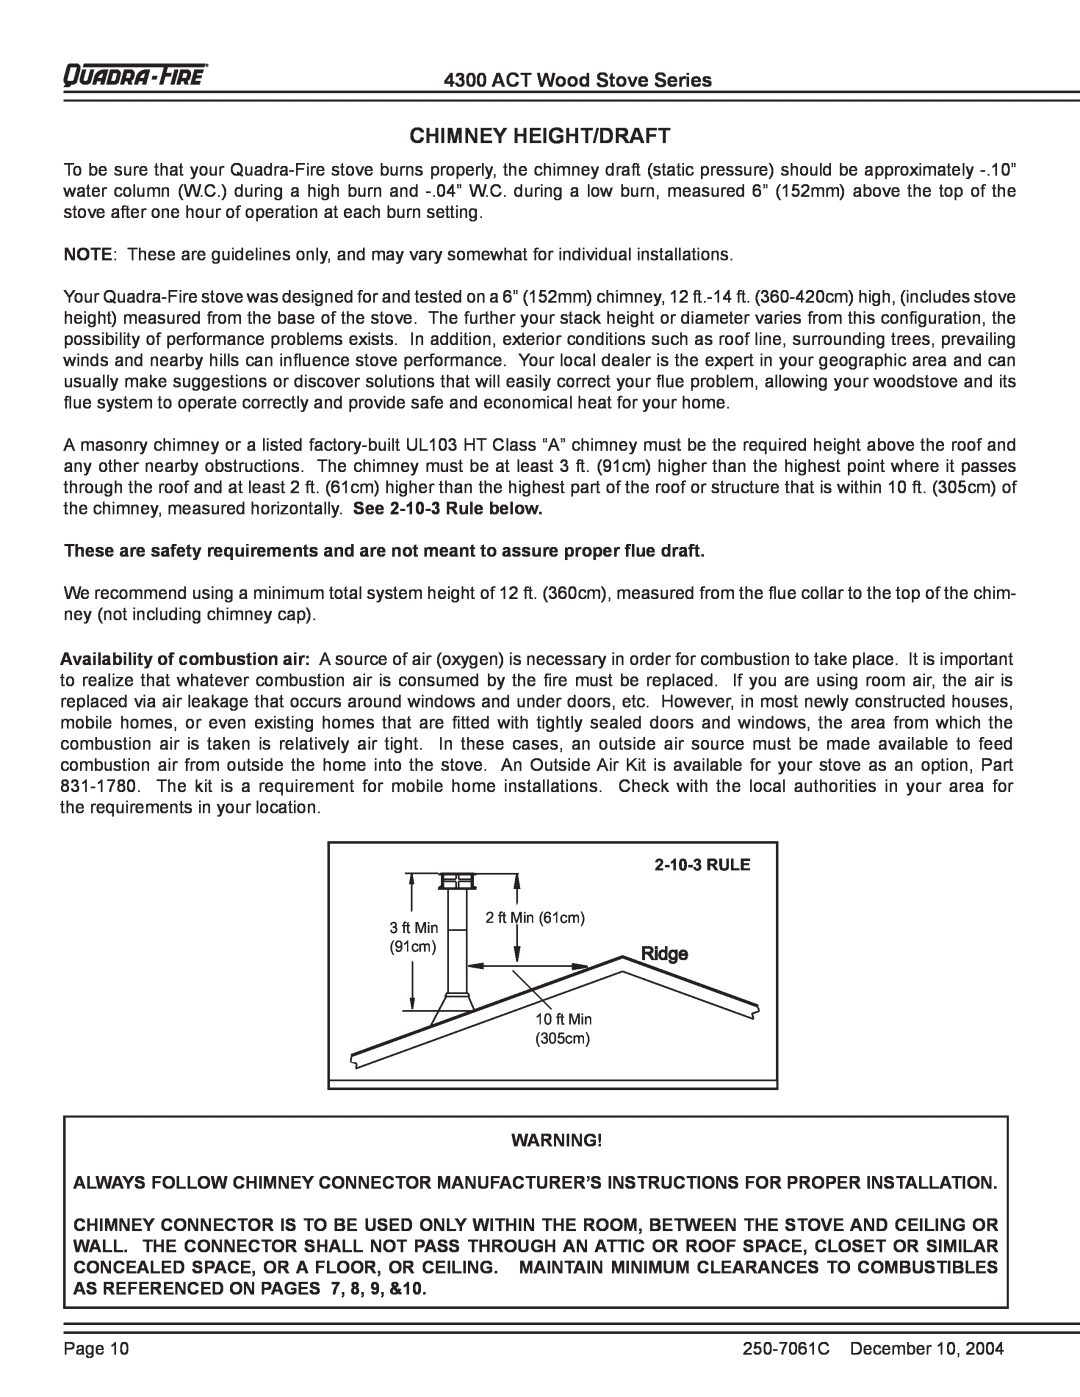 Quadra-Fire 4300 WOOD STOVE SERIES installation instructions Chimney Height/Draft, ACT Wood Stove Series 